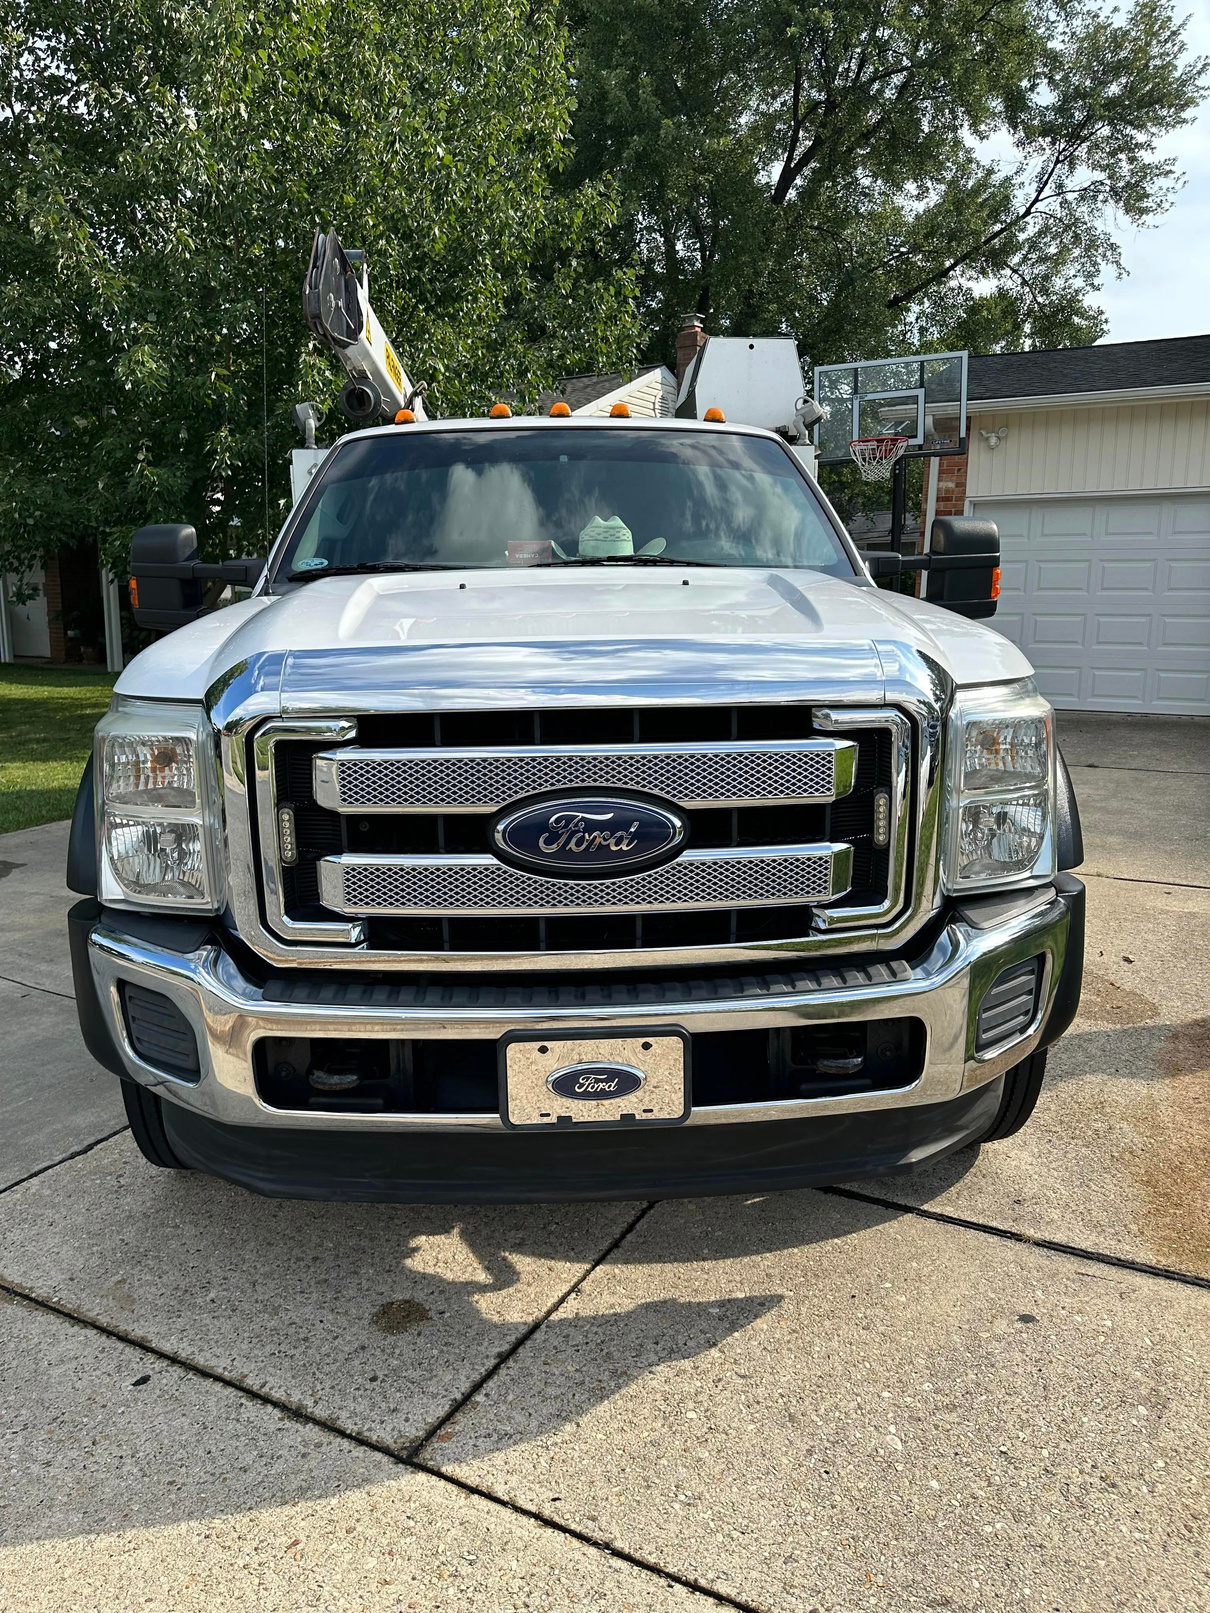 This Ford F-550 work truck is on a monthly detail schedule.